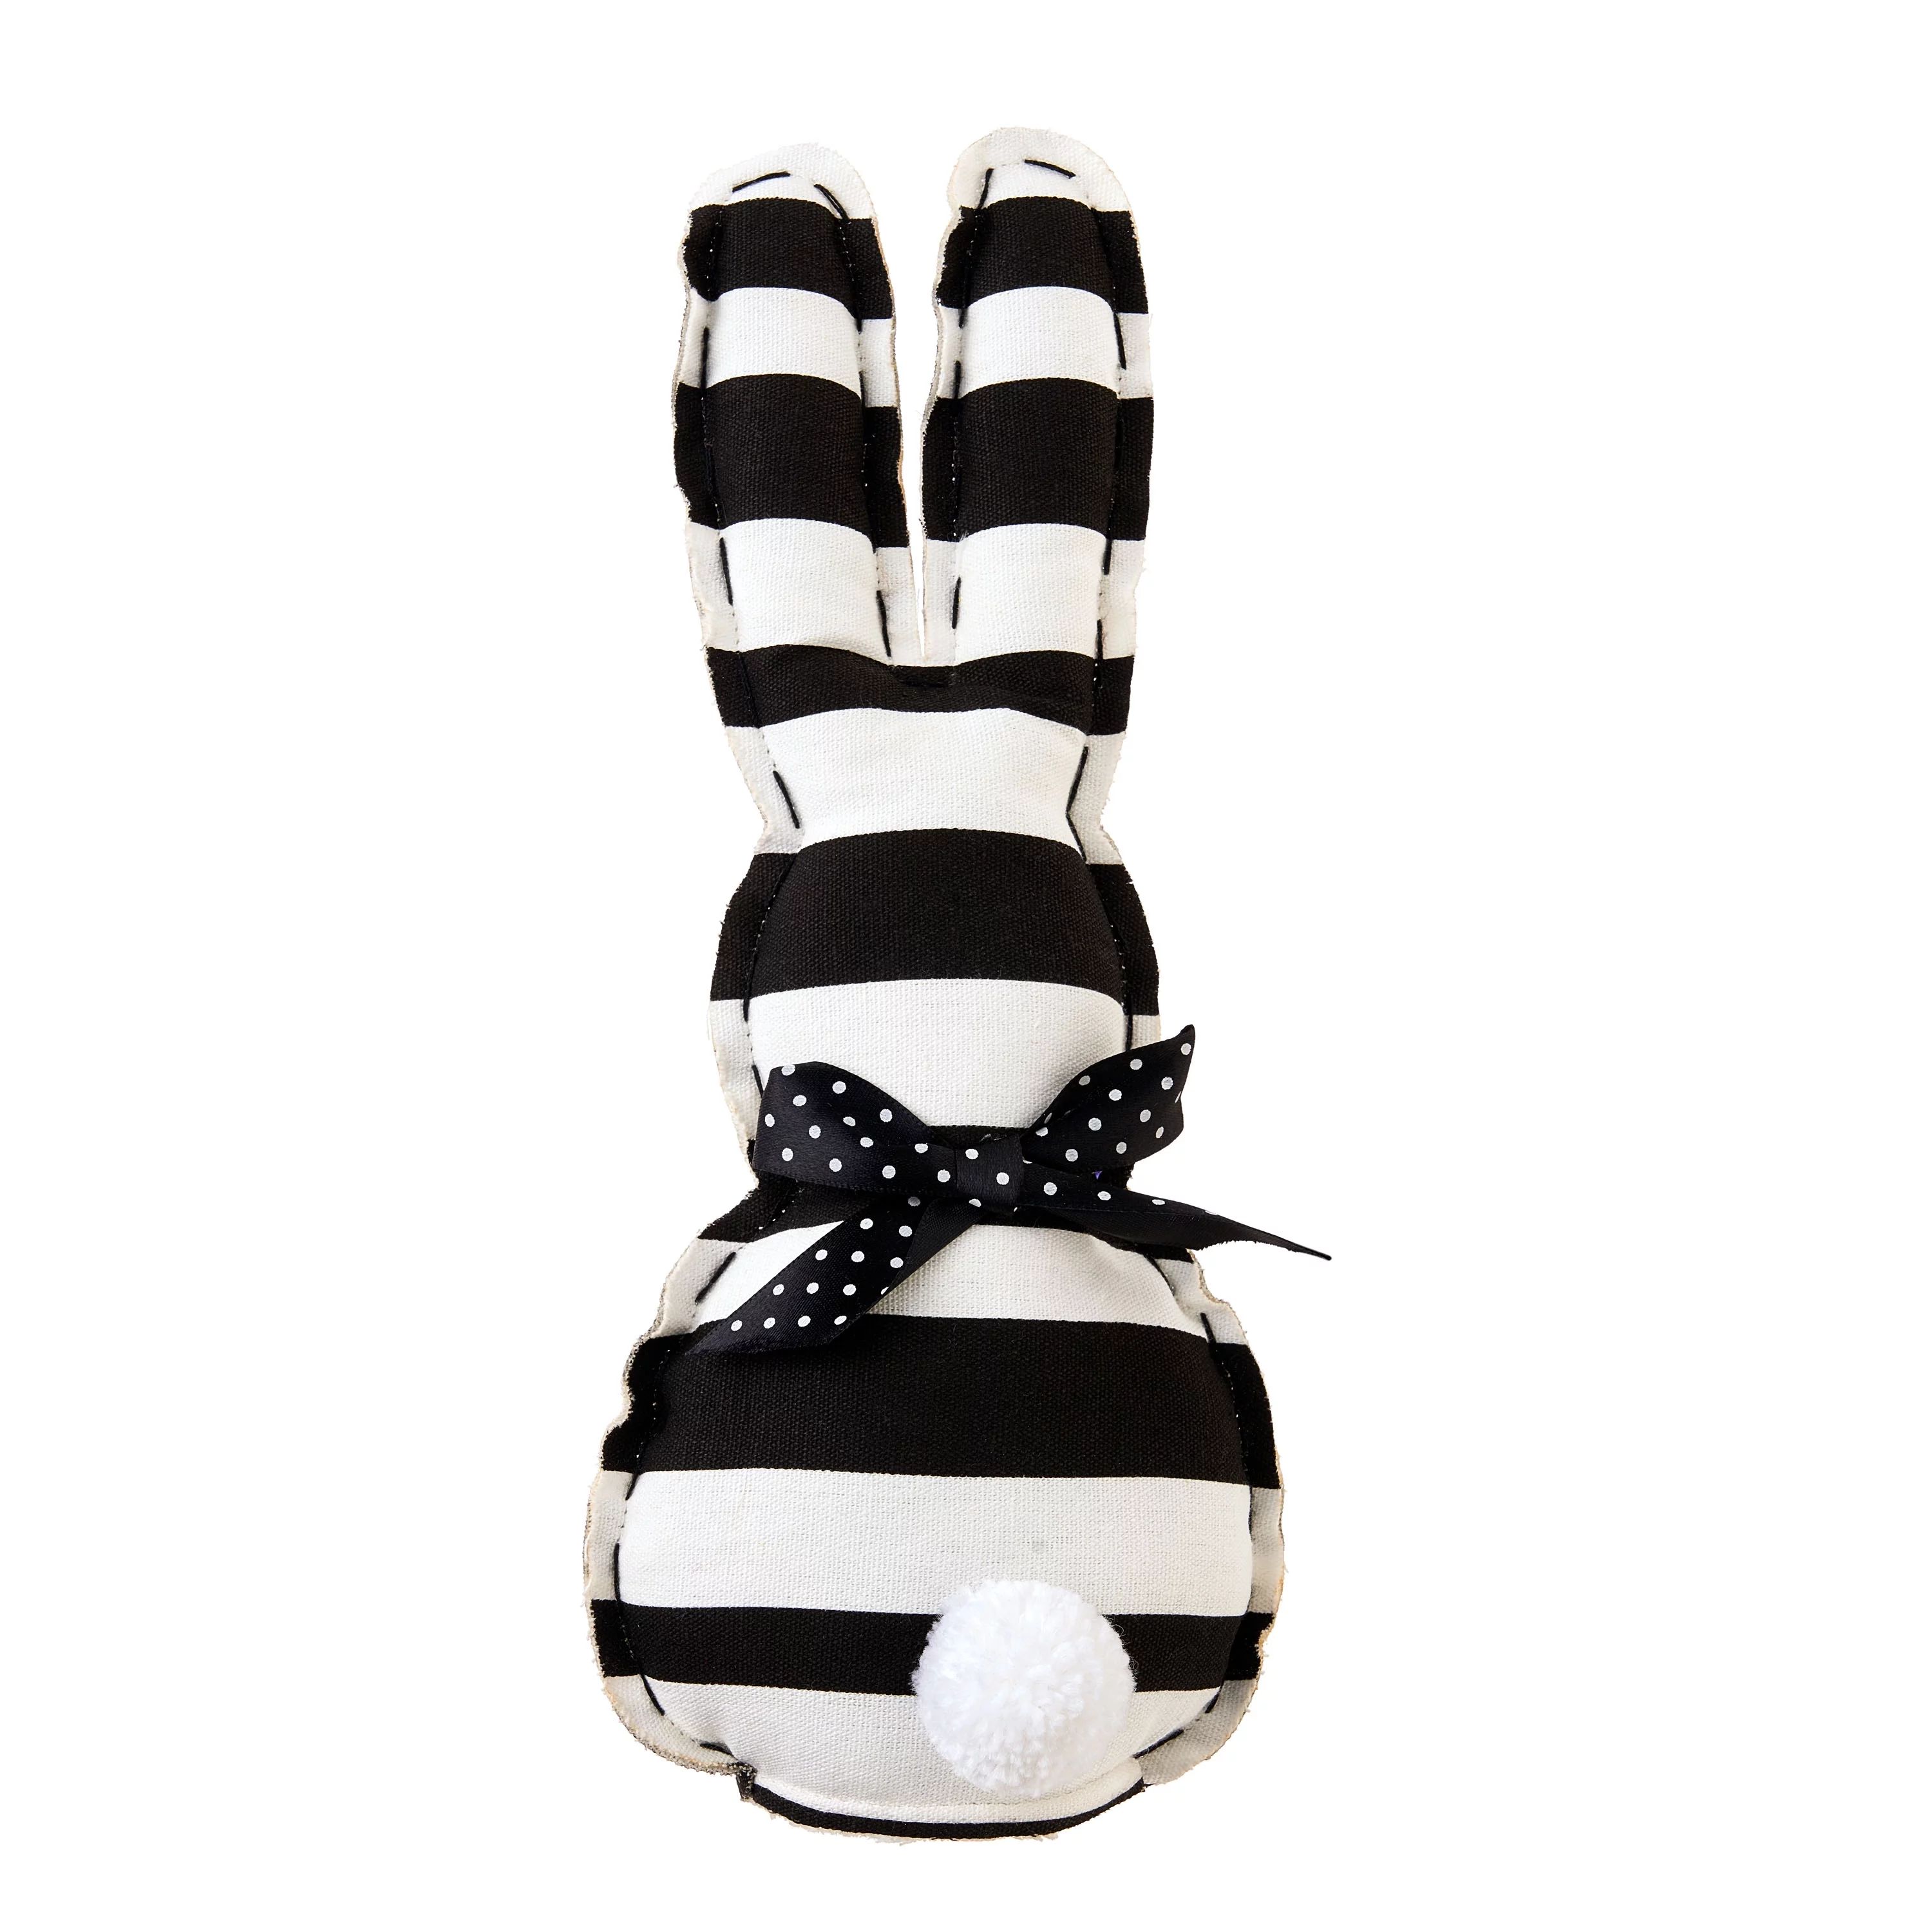 Way To Celebrate Easter Striped Fabric Bunny Tabletop Decoration, Black/White, 11.5" | Walmart (US)